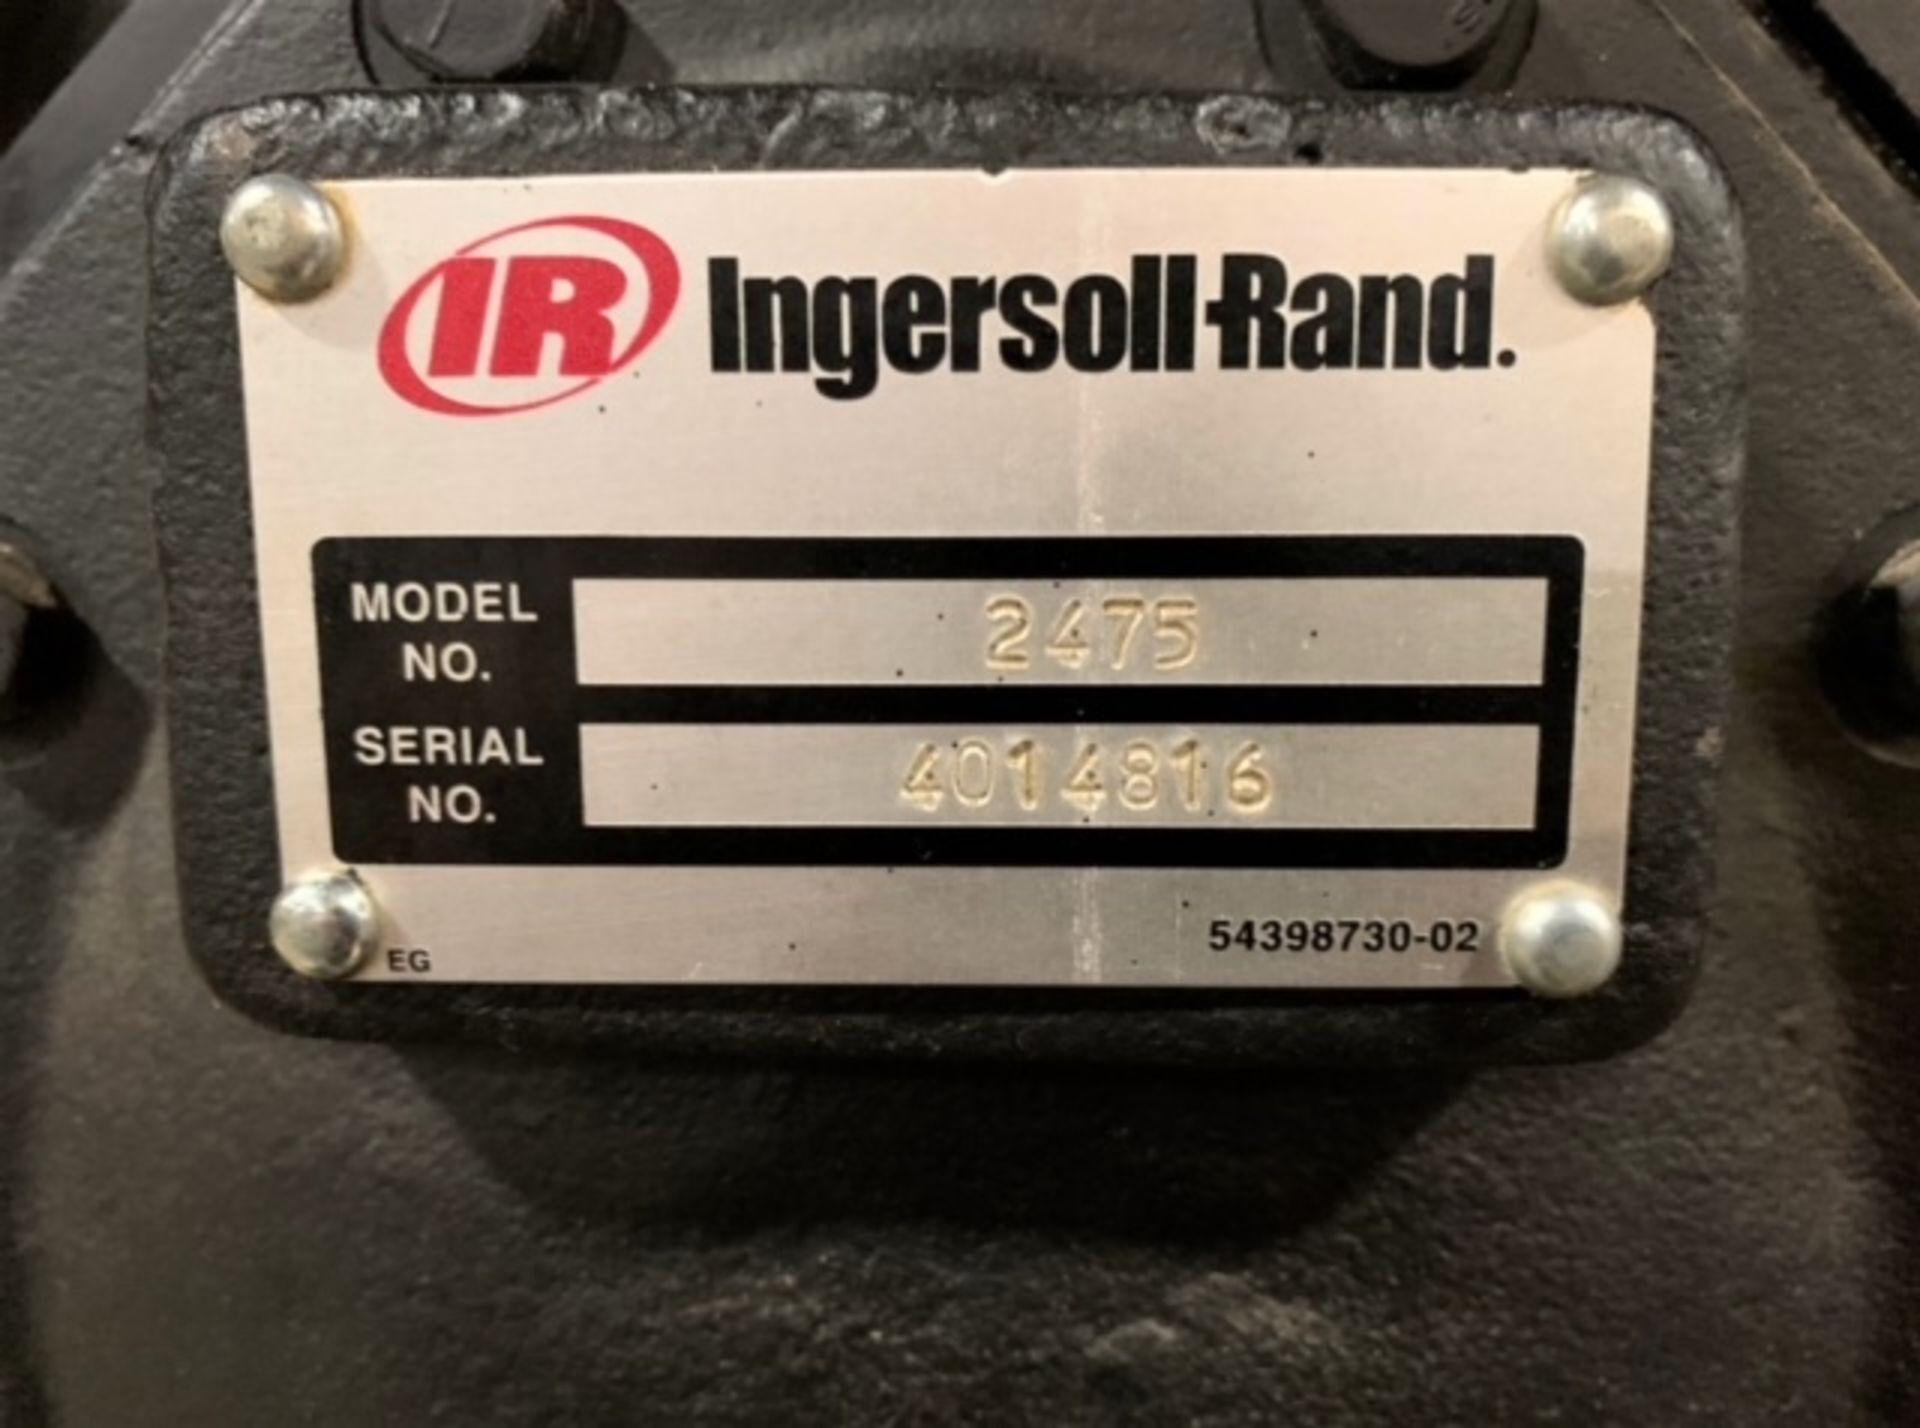 Ingersoll Rand Mdl. 2475N7.5 PSG Reciprocating 2-Stage Air Compressor, 7.5 HP - Image 8 of 10